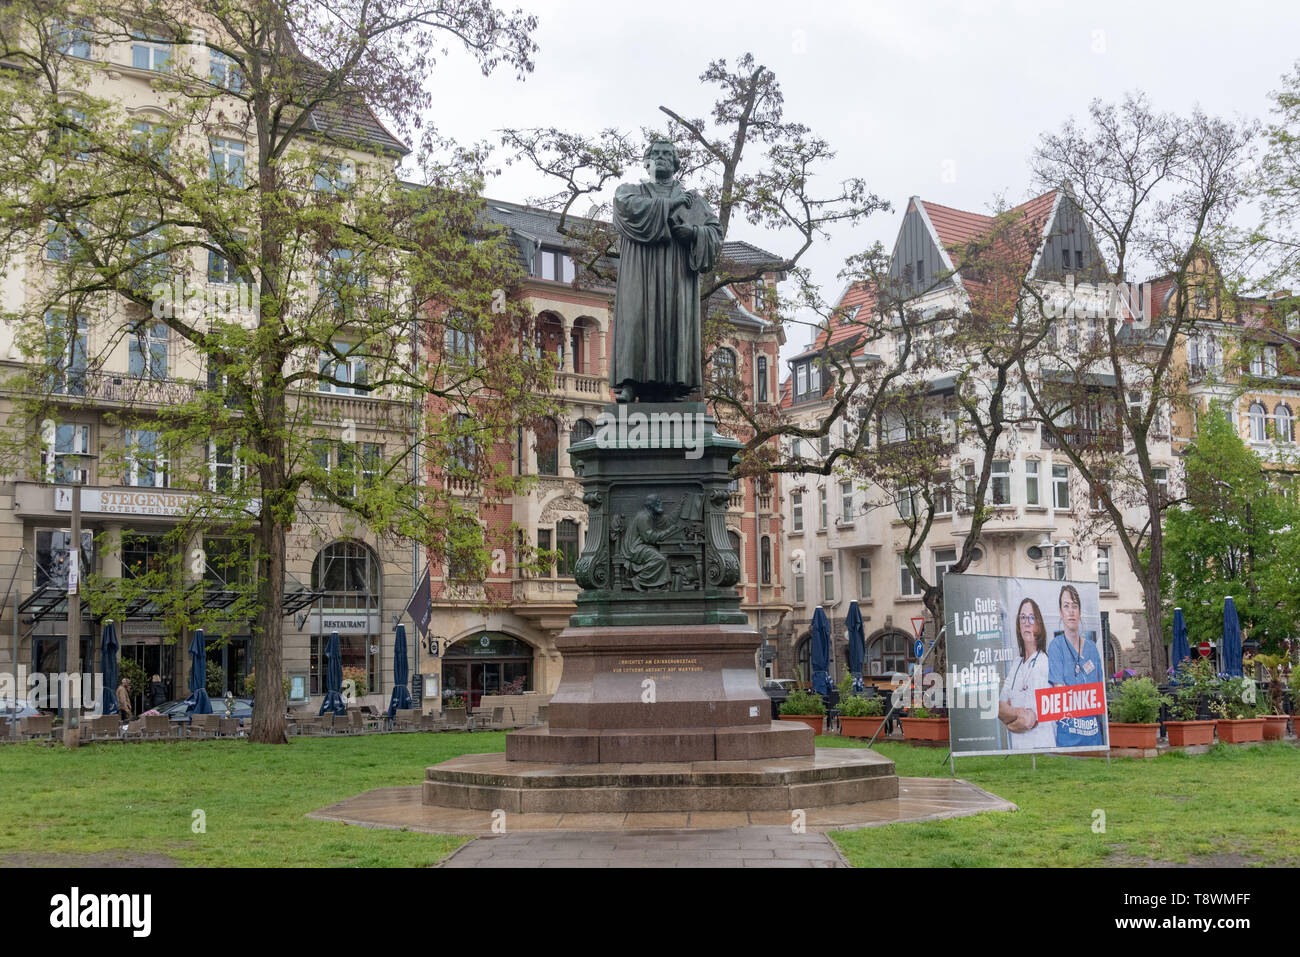 Eisenach, Germany - May 11, 2019: View of the Luther Monument in Eisenach, Germany. Stock Photo